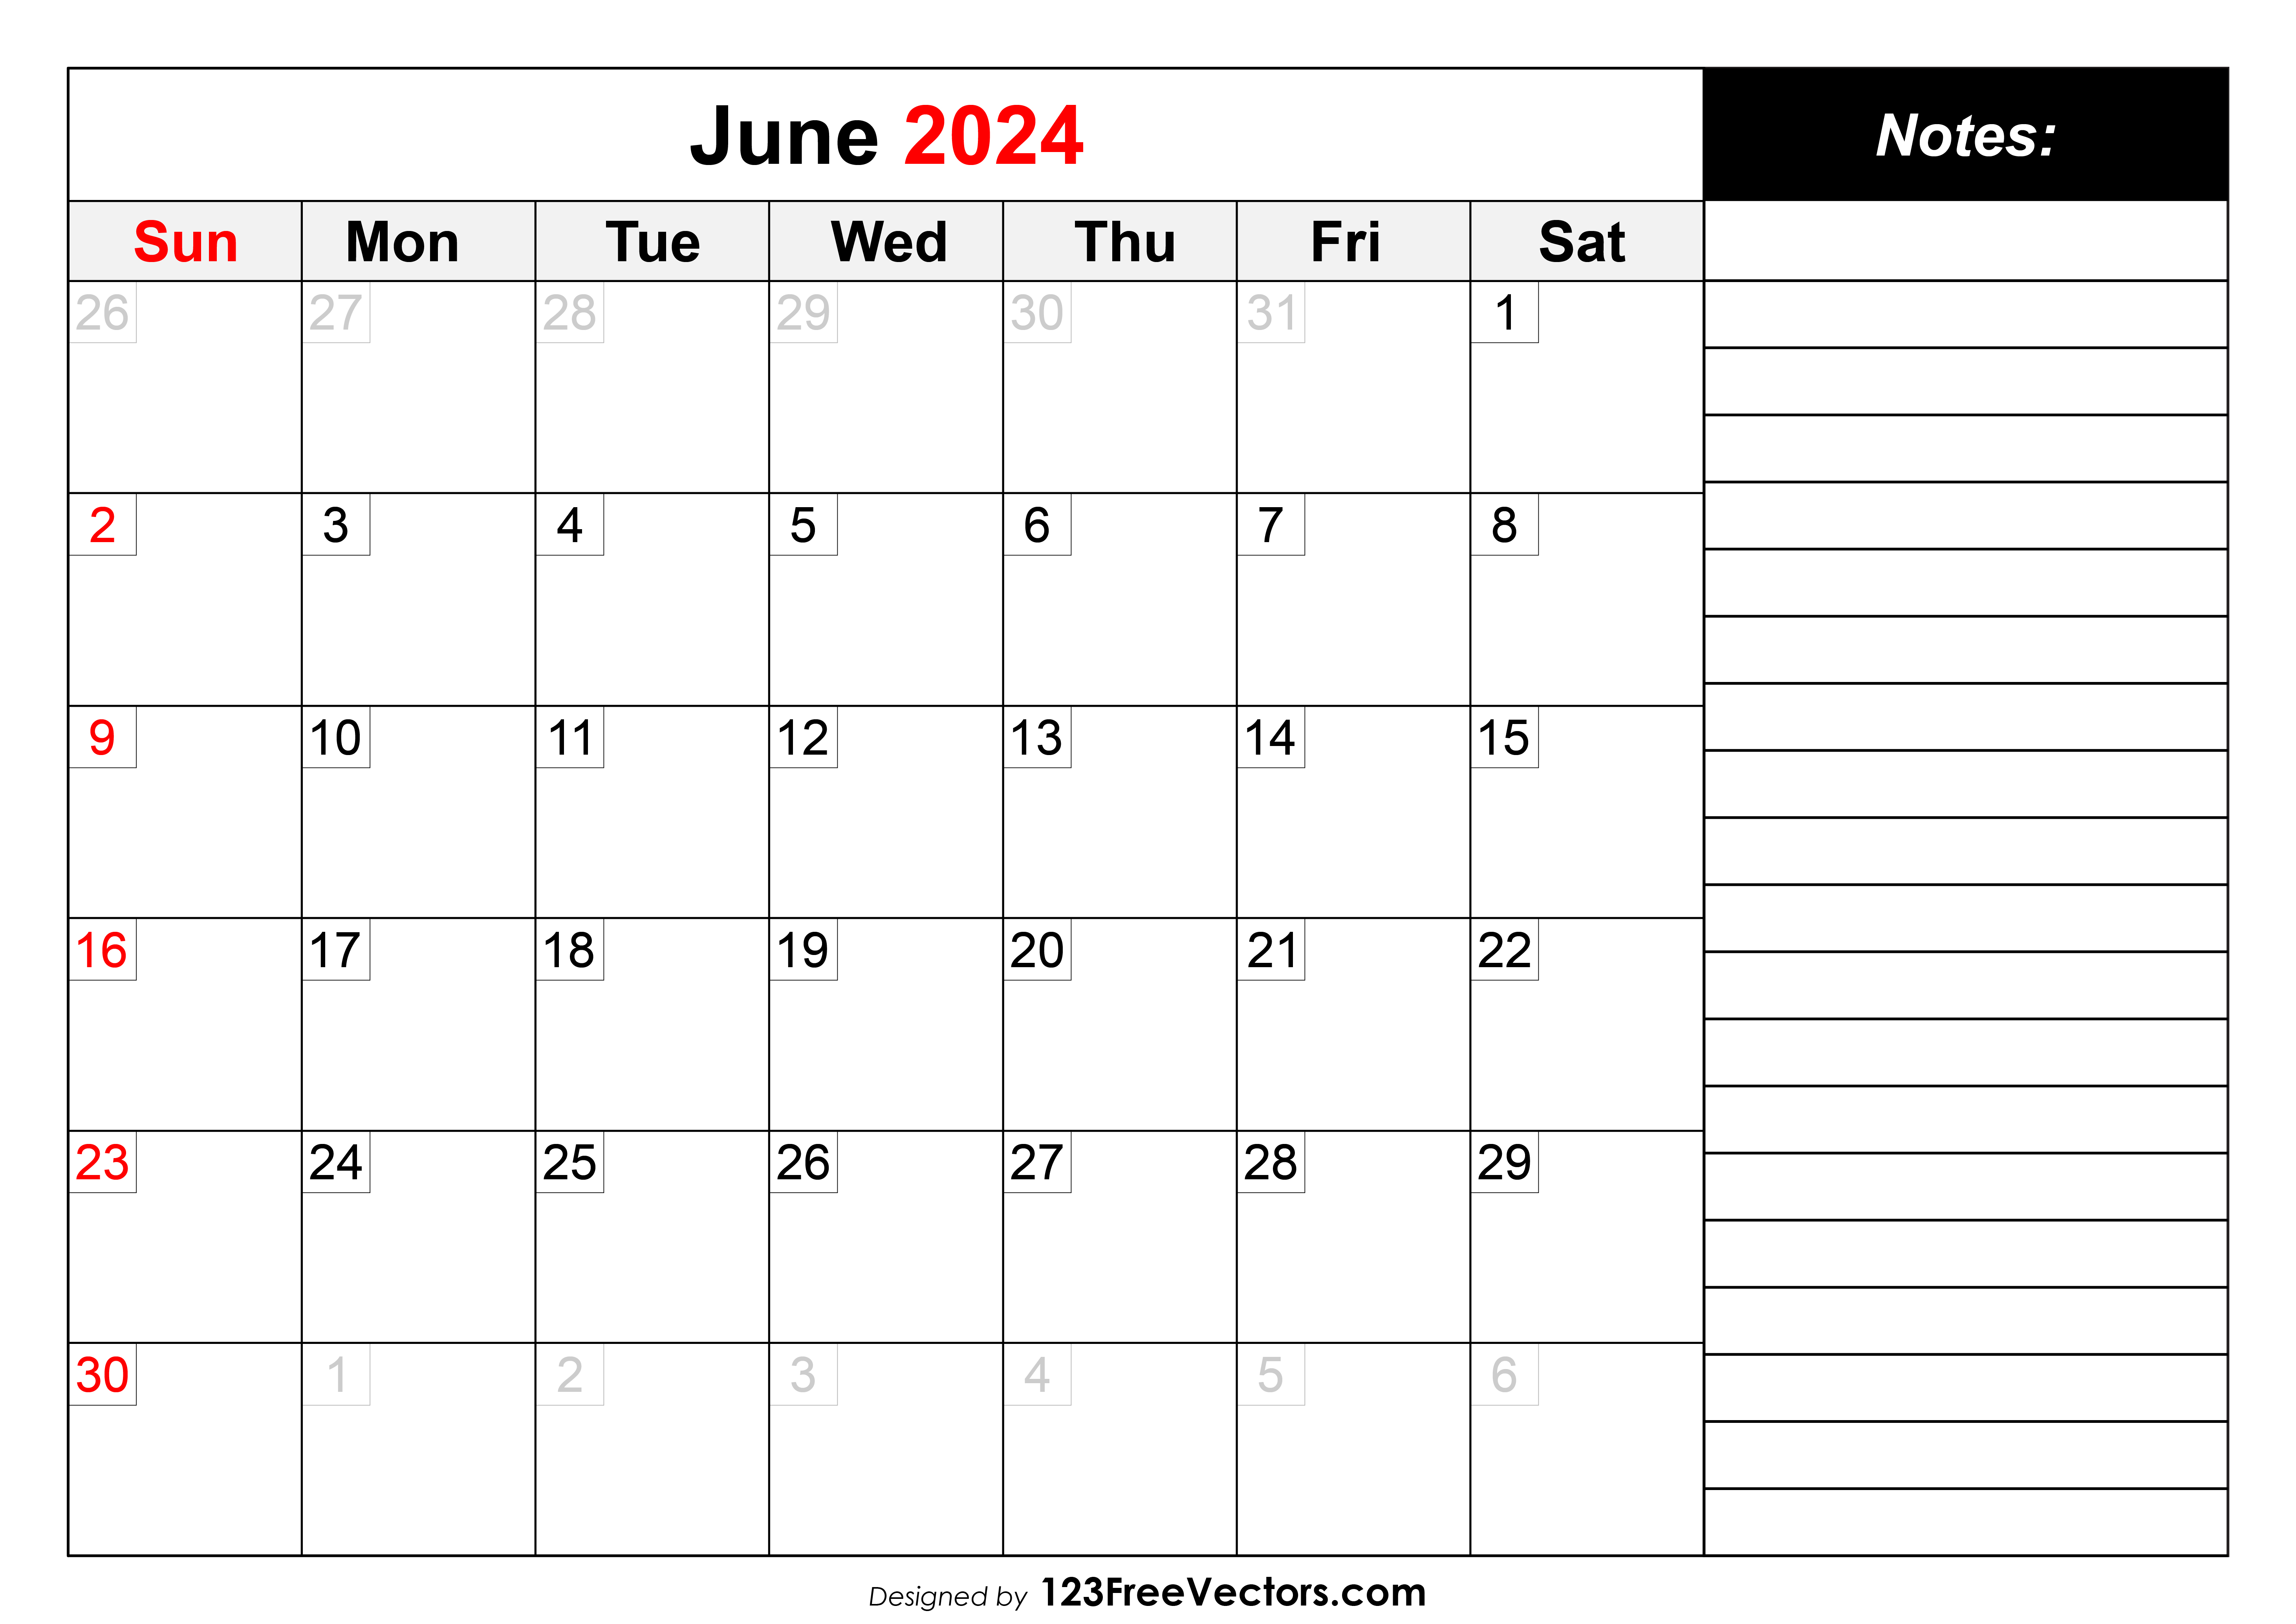 Calendar Of June 2024 With Notes Addie Anstice